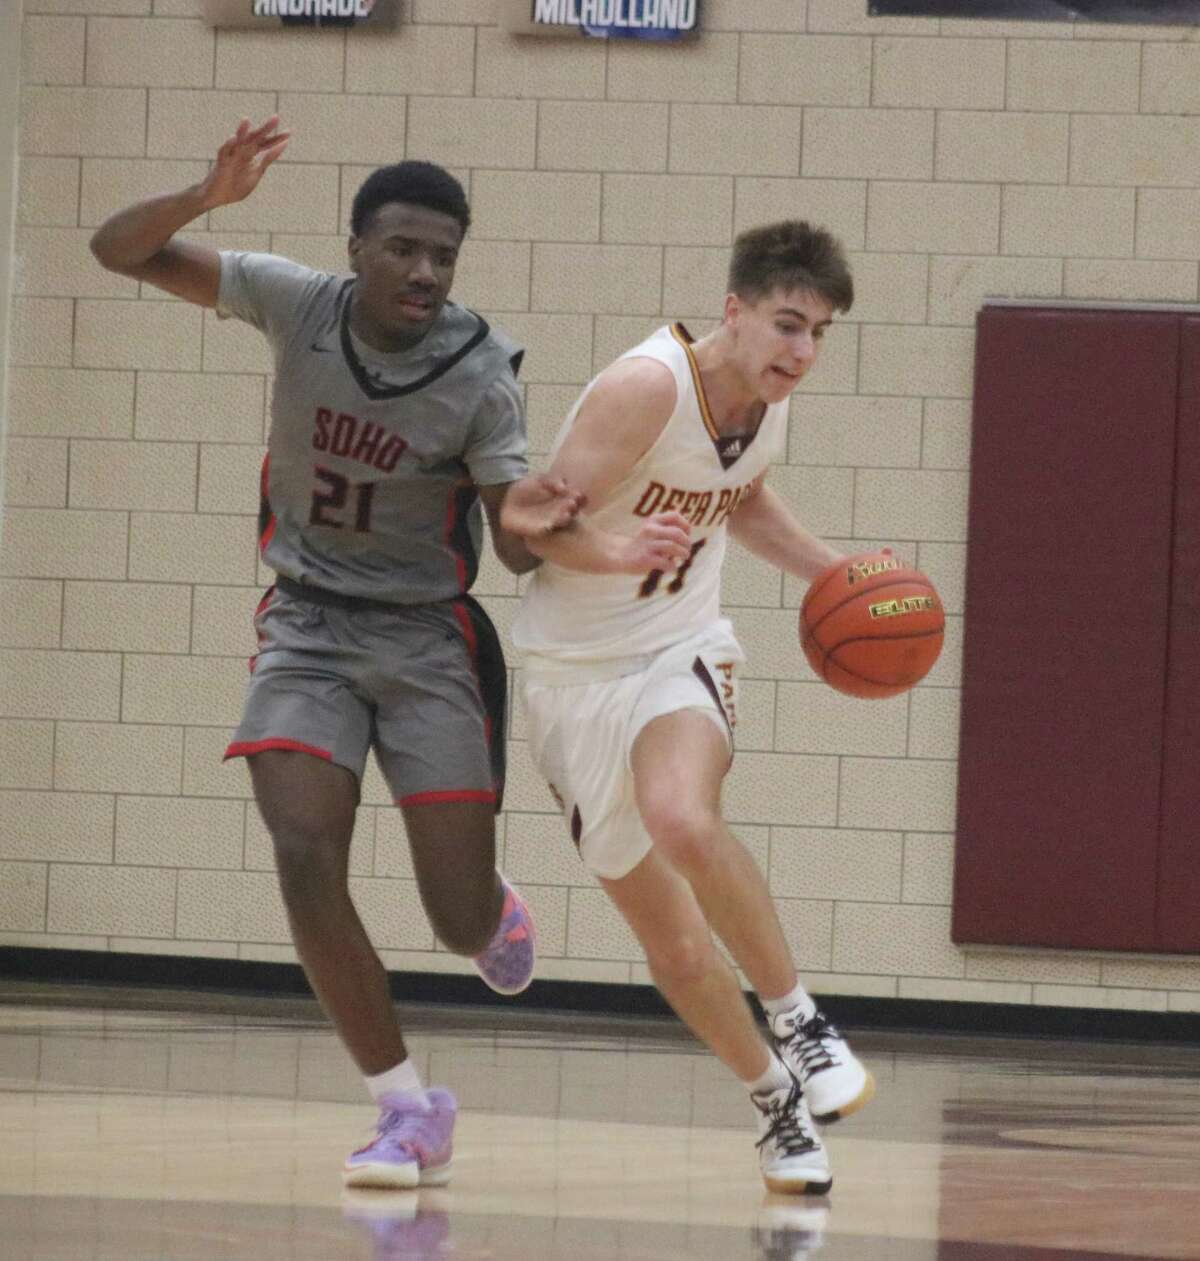 Deer Park's Garrett Topping is shadowed by South Houston's Josiah Ware as Topping brings the ball up the floor during Wednesday night's 22-6A contest.